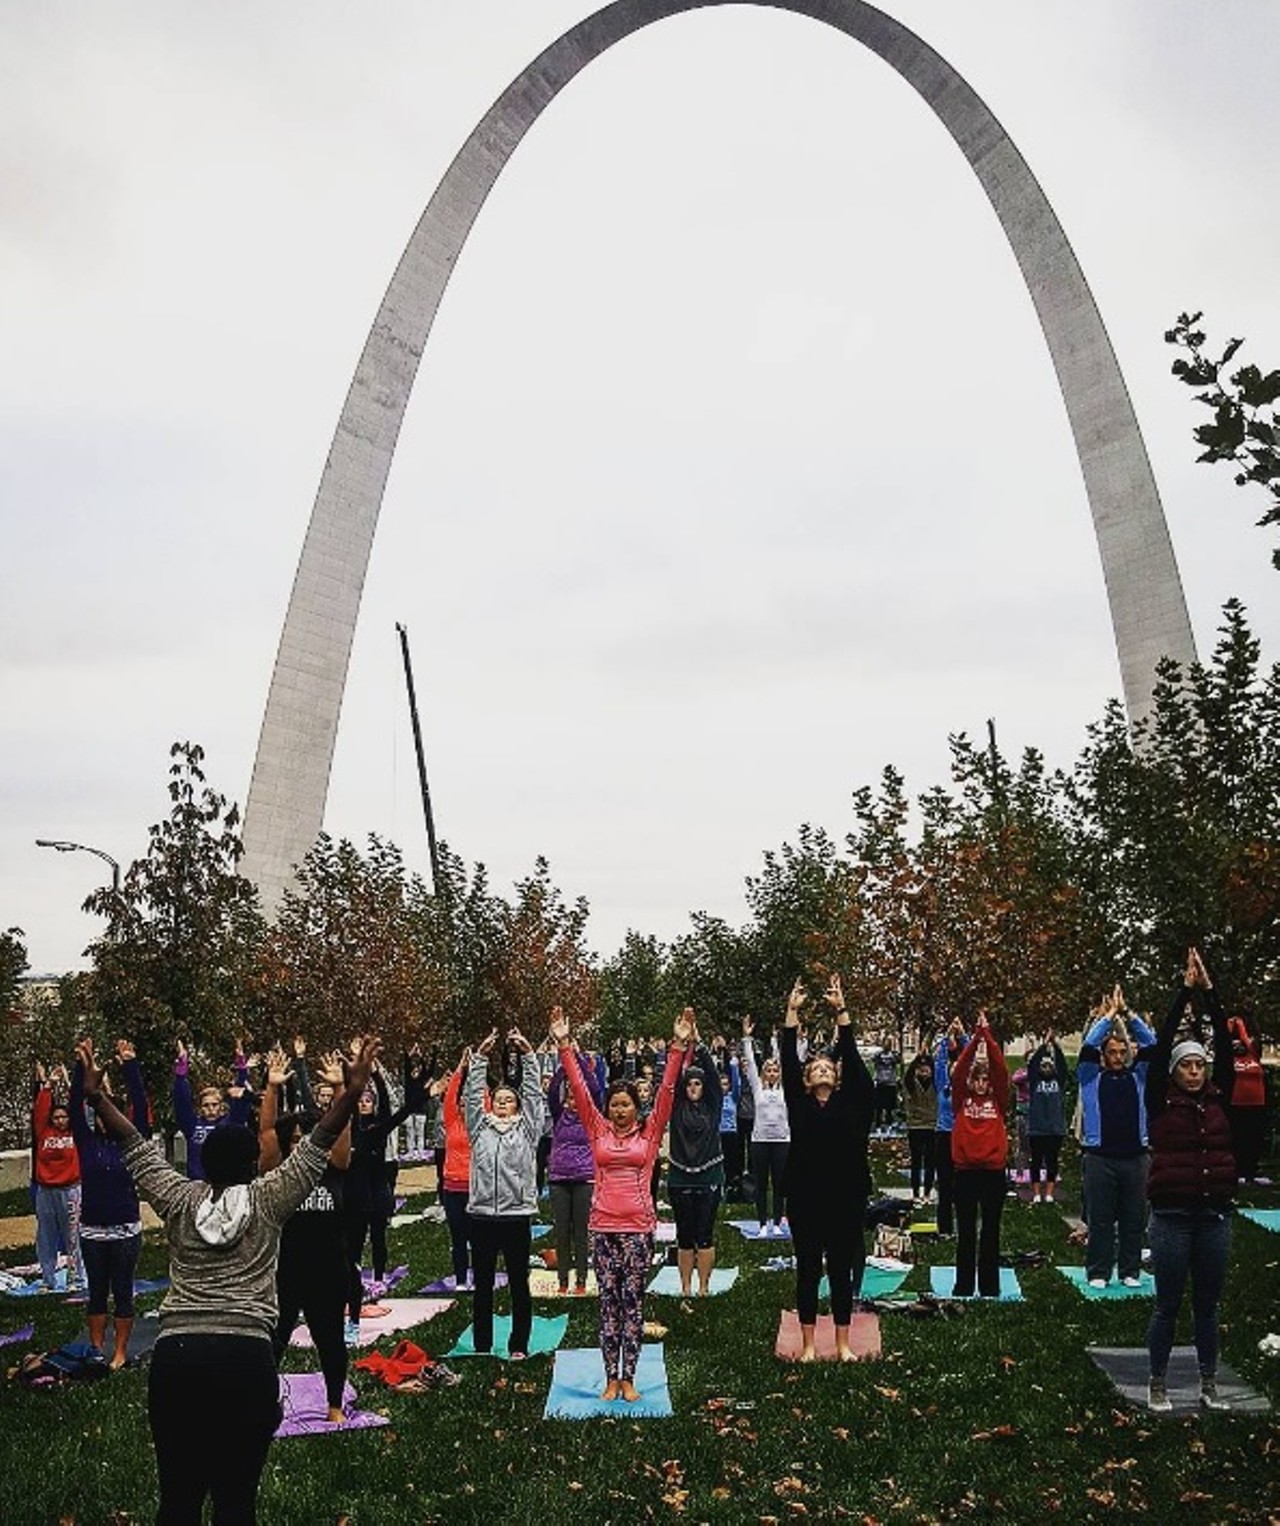 Yoga Buzz
Yoga Buzz aims to get you out of the studio with yoga events held in fun locations all around St. Louis. From hotels to Thaxton Speakeasy to the Arch, Yoga Buzz has a way of keeping things interesting. Keep an eye on new events all year long. Photo courtesy of Instagram / thebizhippie.